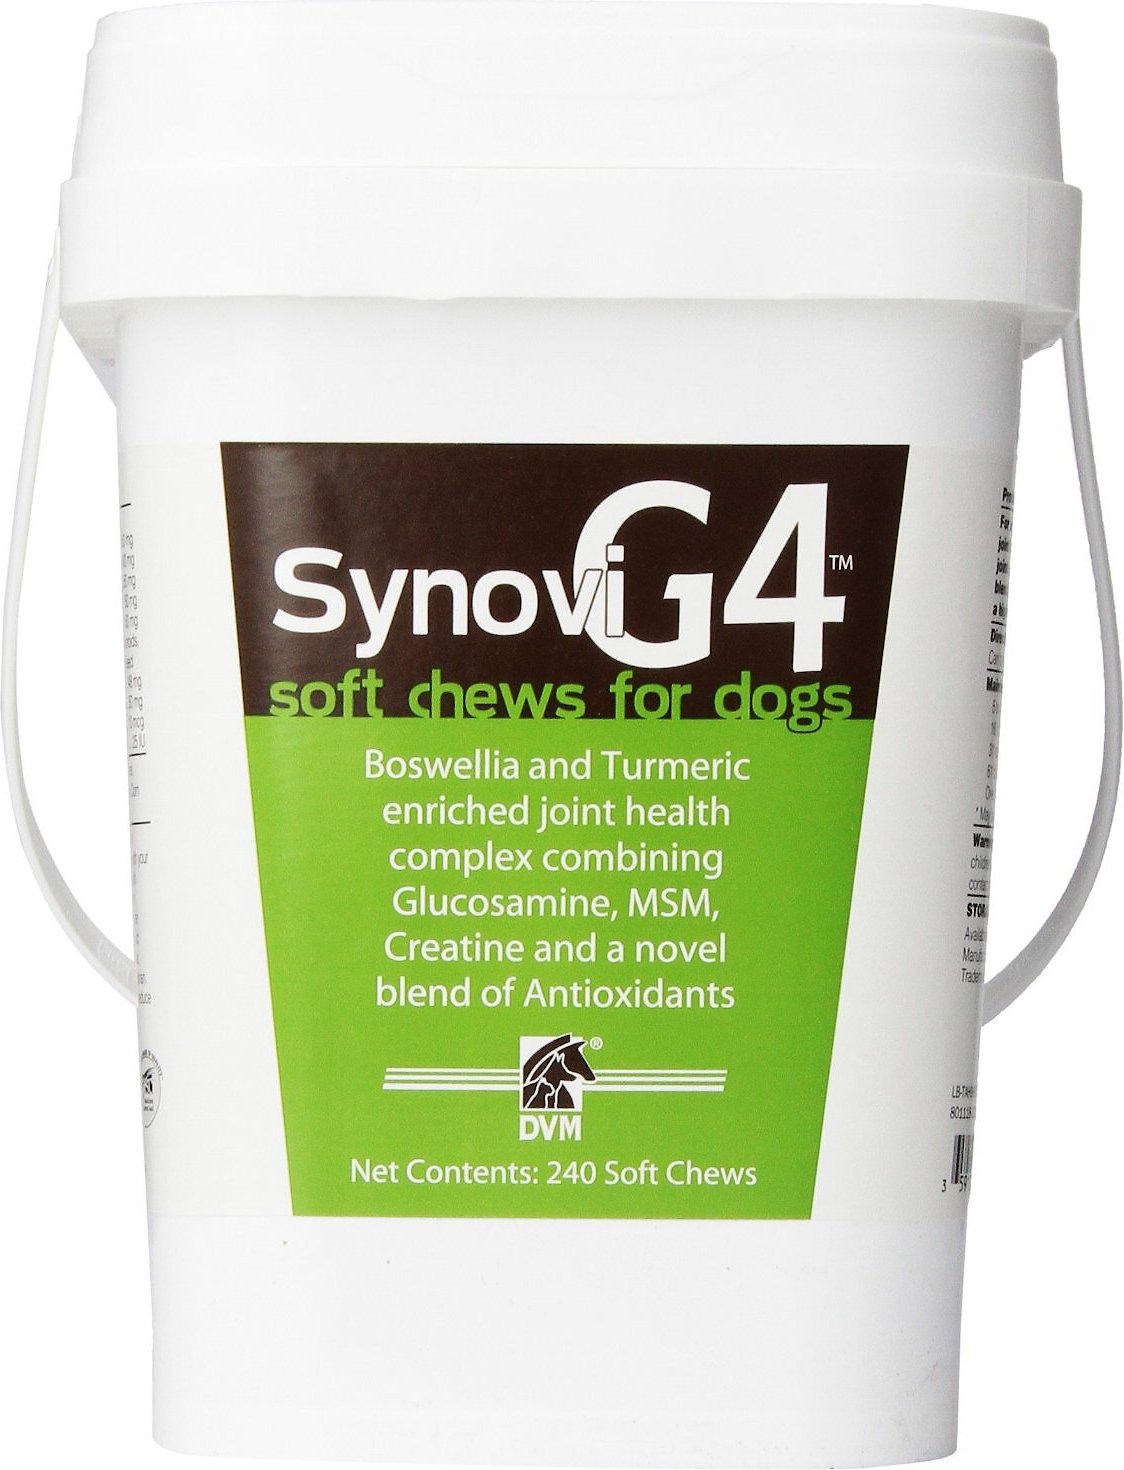 synovi-g4-joint-health-soft-chews-for-dogs-240-count-bottle-chewy